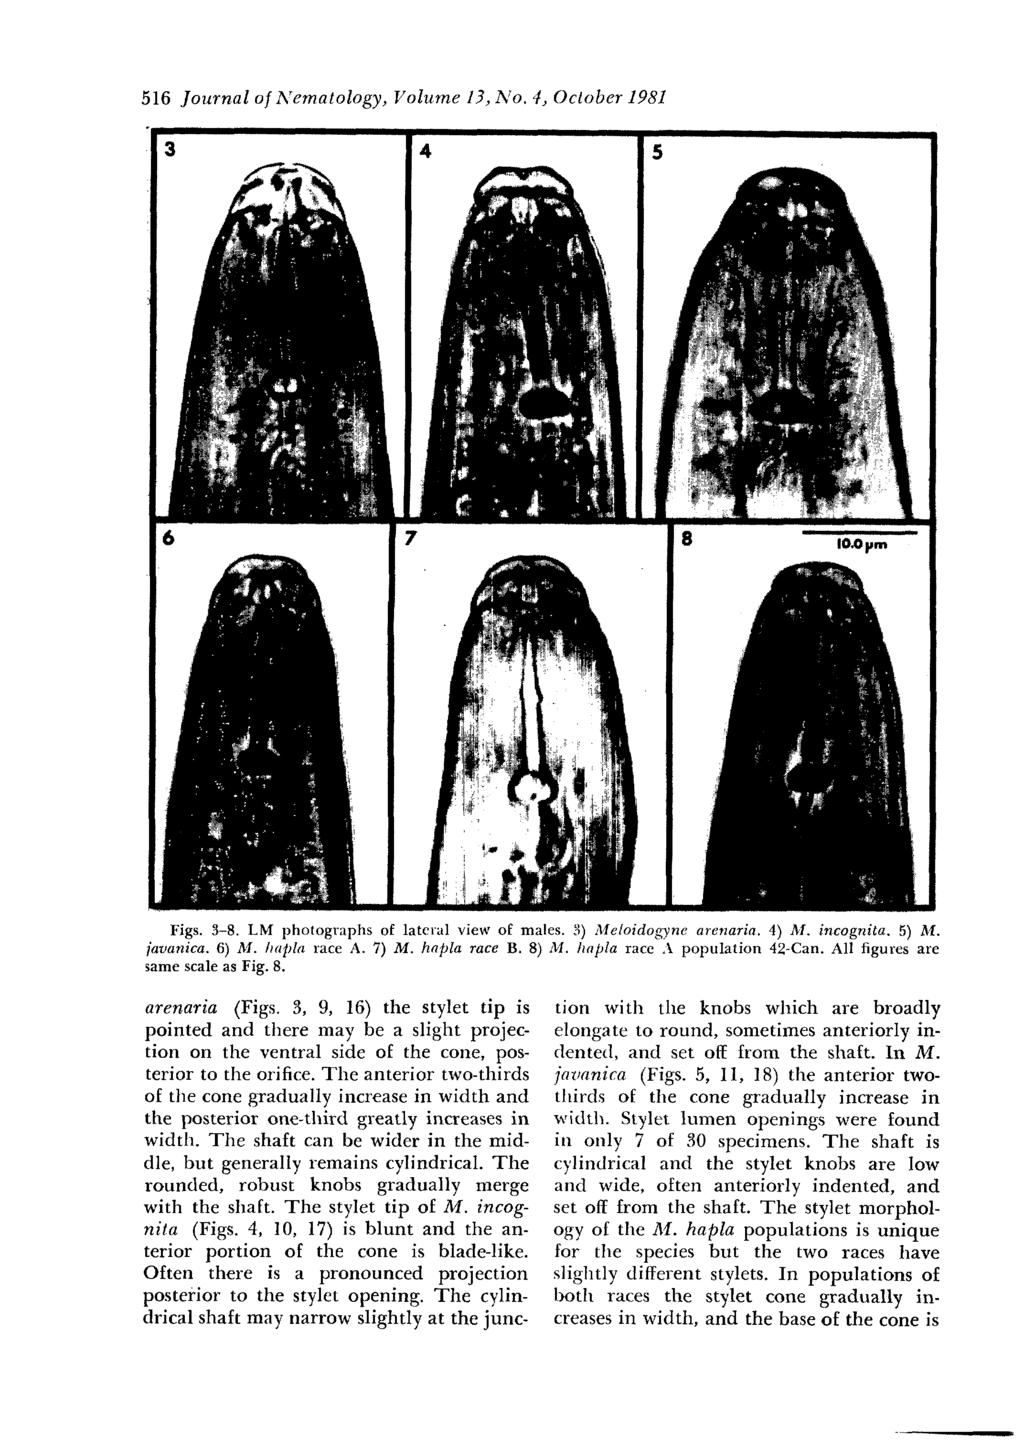 516 Journal of Nernatology, Volume 13, No. 4, October 1981 Figs. 3-8. LM photographs of lateral view of males. 3) Meloidogyne arenaria. 4) M. incognita. 5) M. iavanica. 6) M. hapla race A. 7) M.